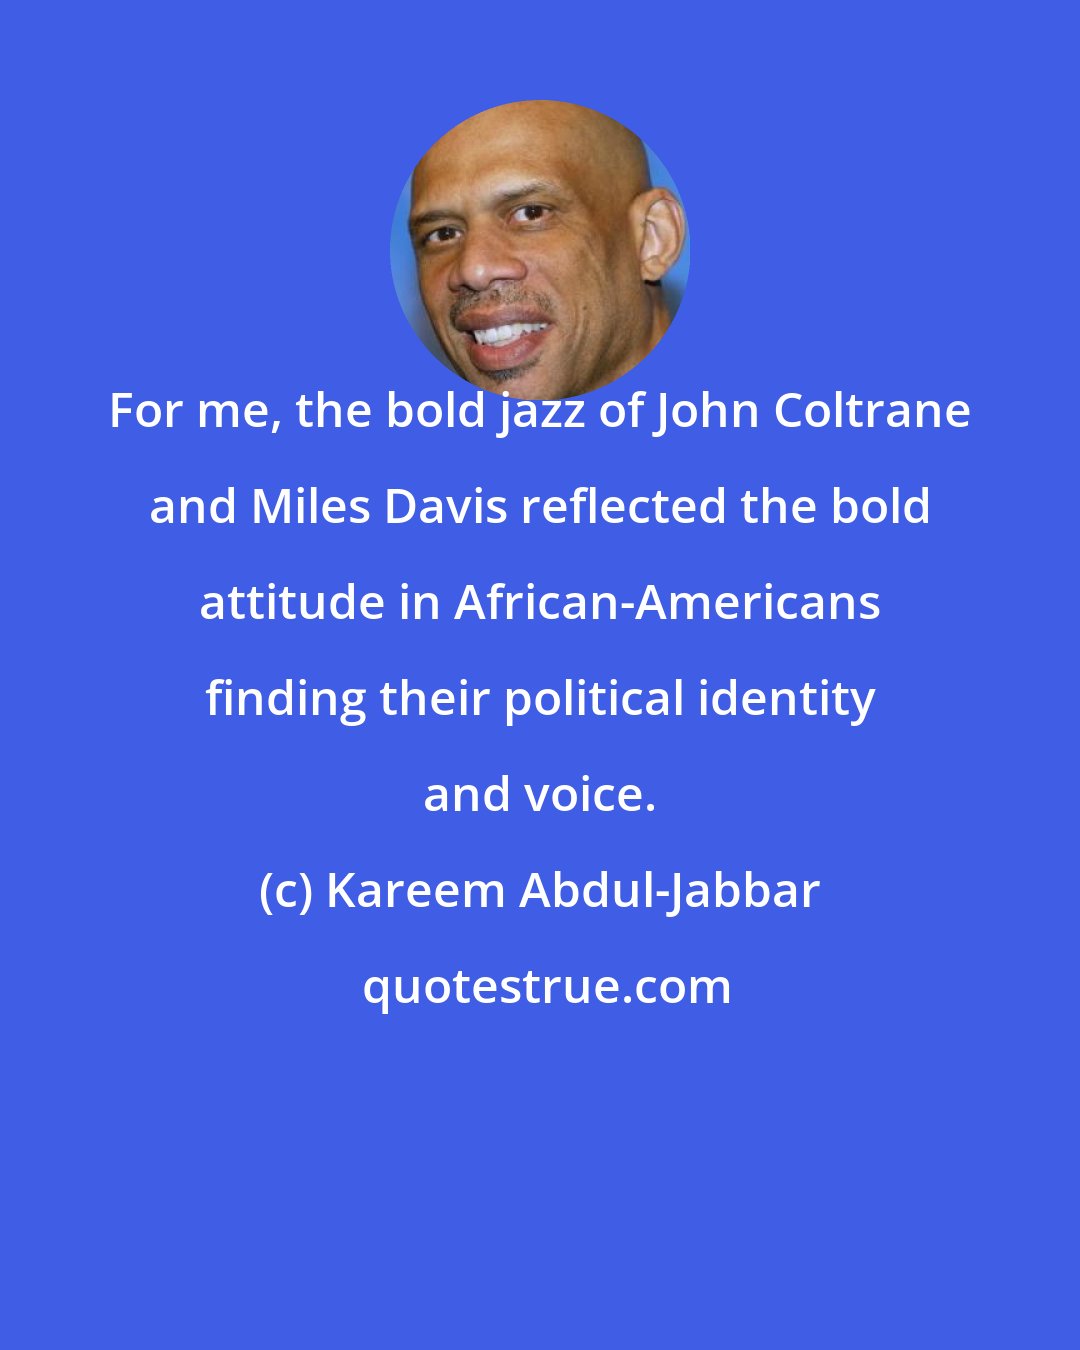 Kareem Abdul-Jabbar: For me, the bold jazz of John Coltrane and Miles Davis reflected the bold attitude in African-Americans finding their political identity and voice.